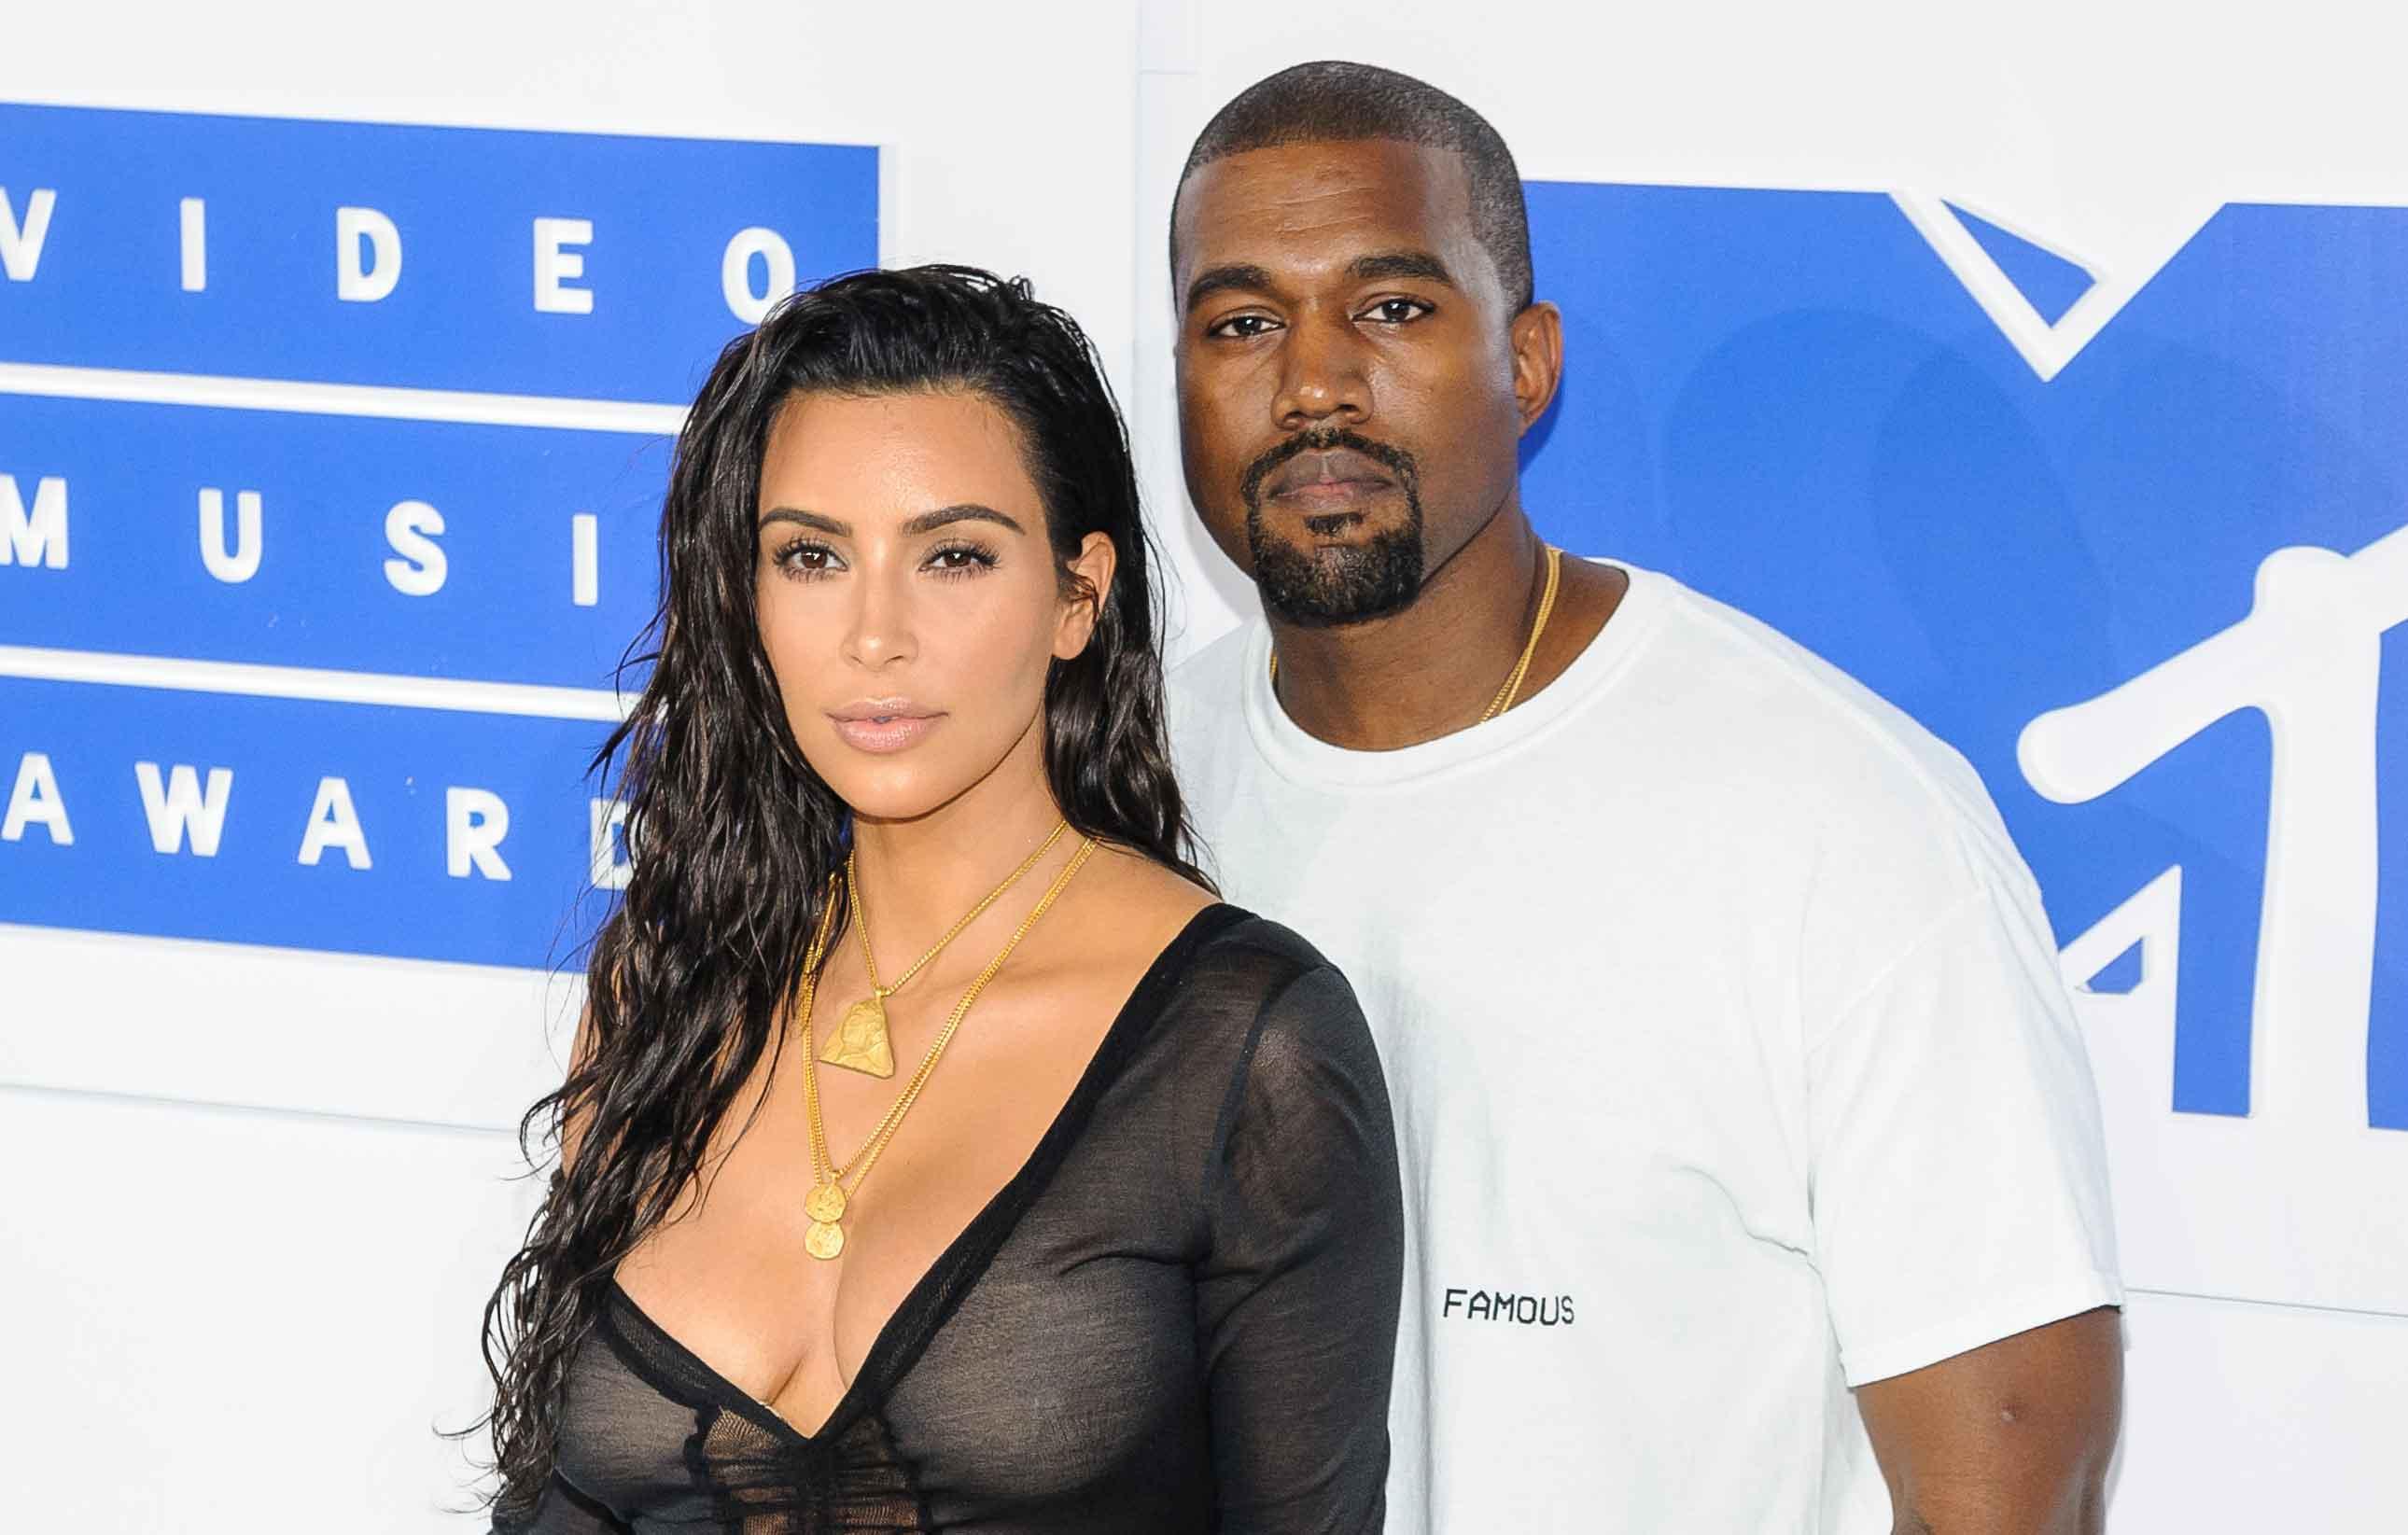 Kim Kardashian West Turns a Sports Bra (Yes) Into a Chic Party Top